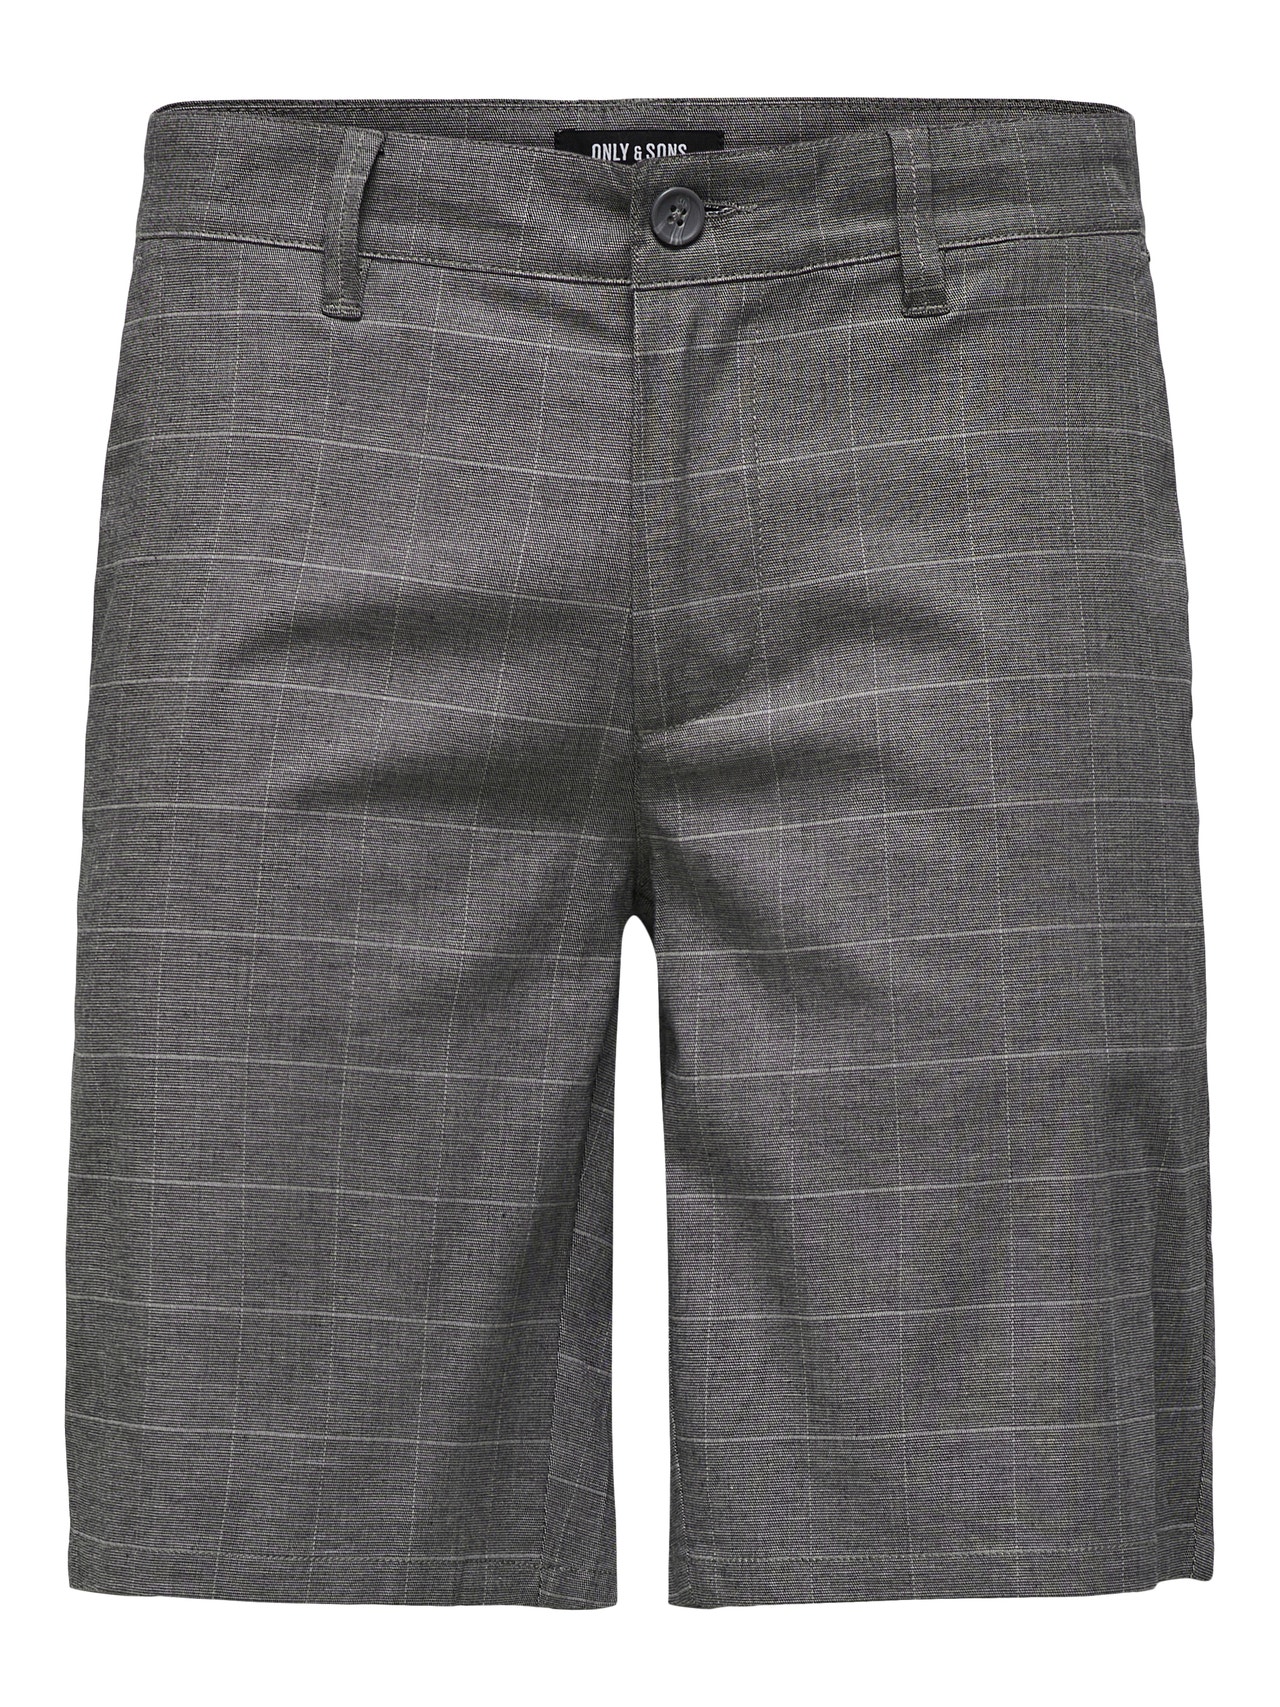 ONLY & SONS Regular Fit Shorts -Grey Pinstripe - 22020475